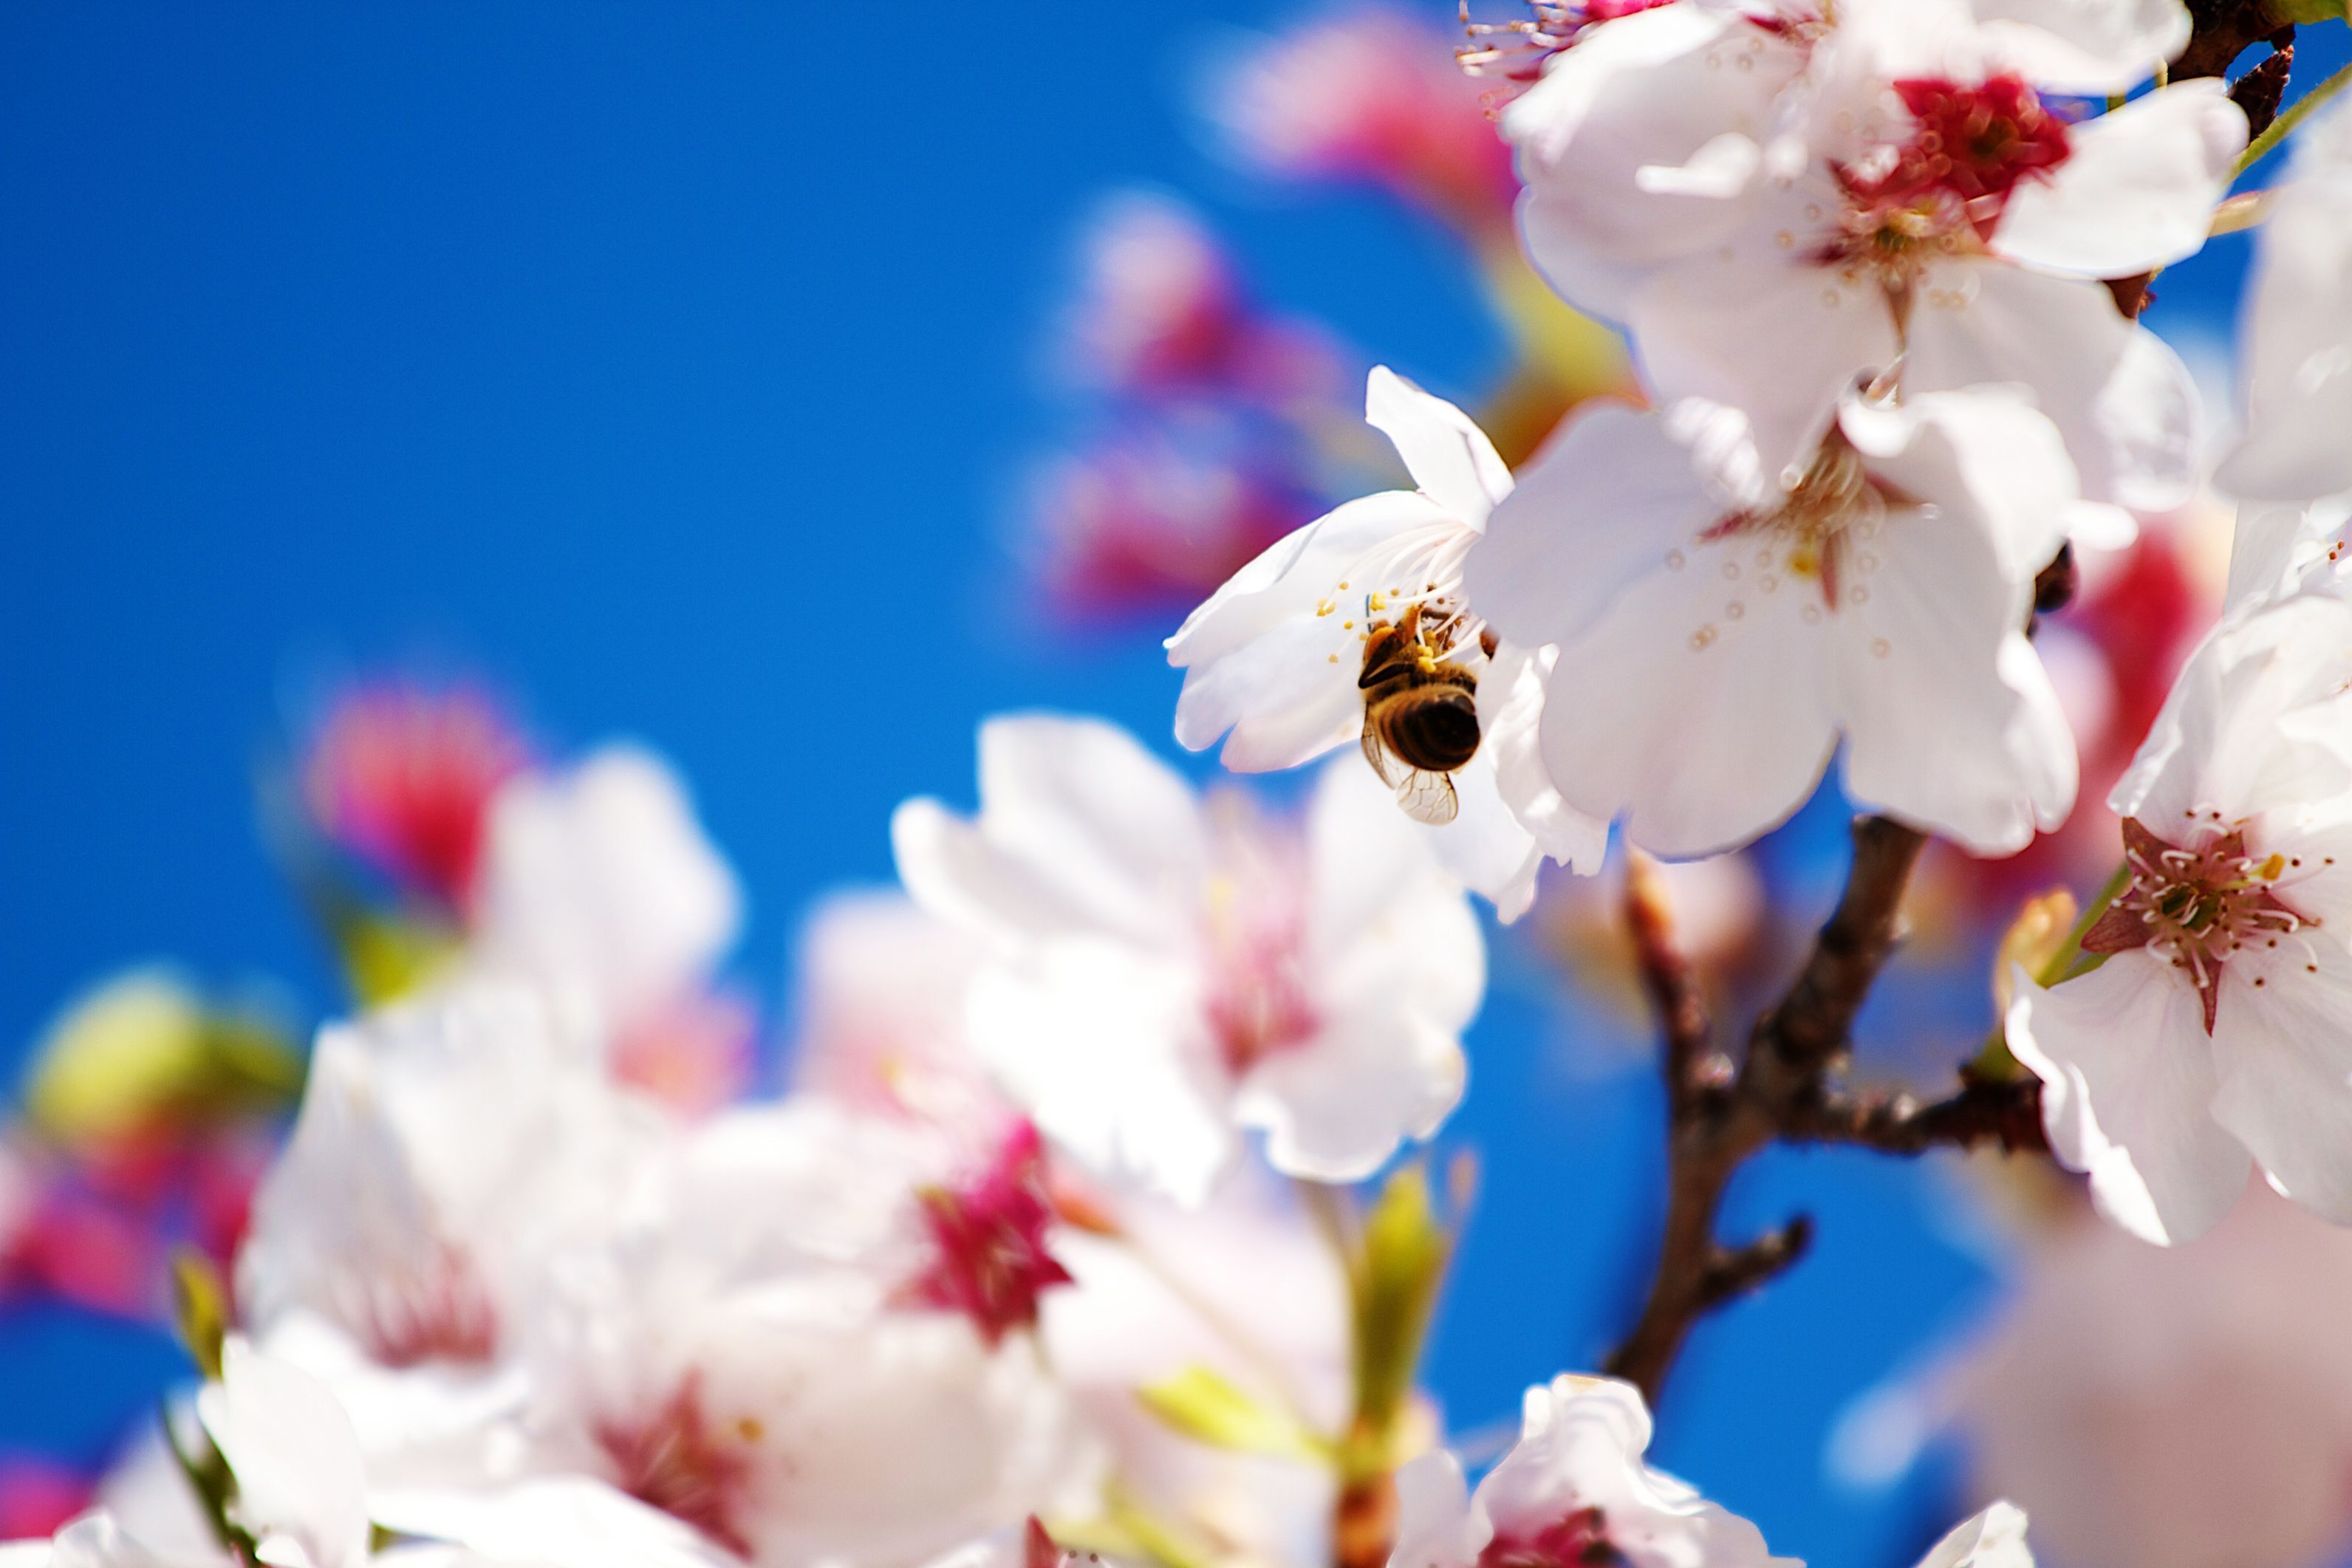 spring flower pictures and wallpapers Download